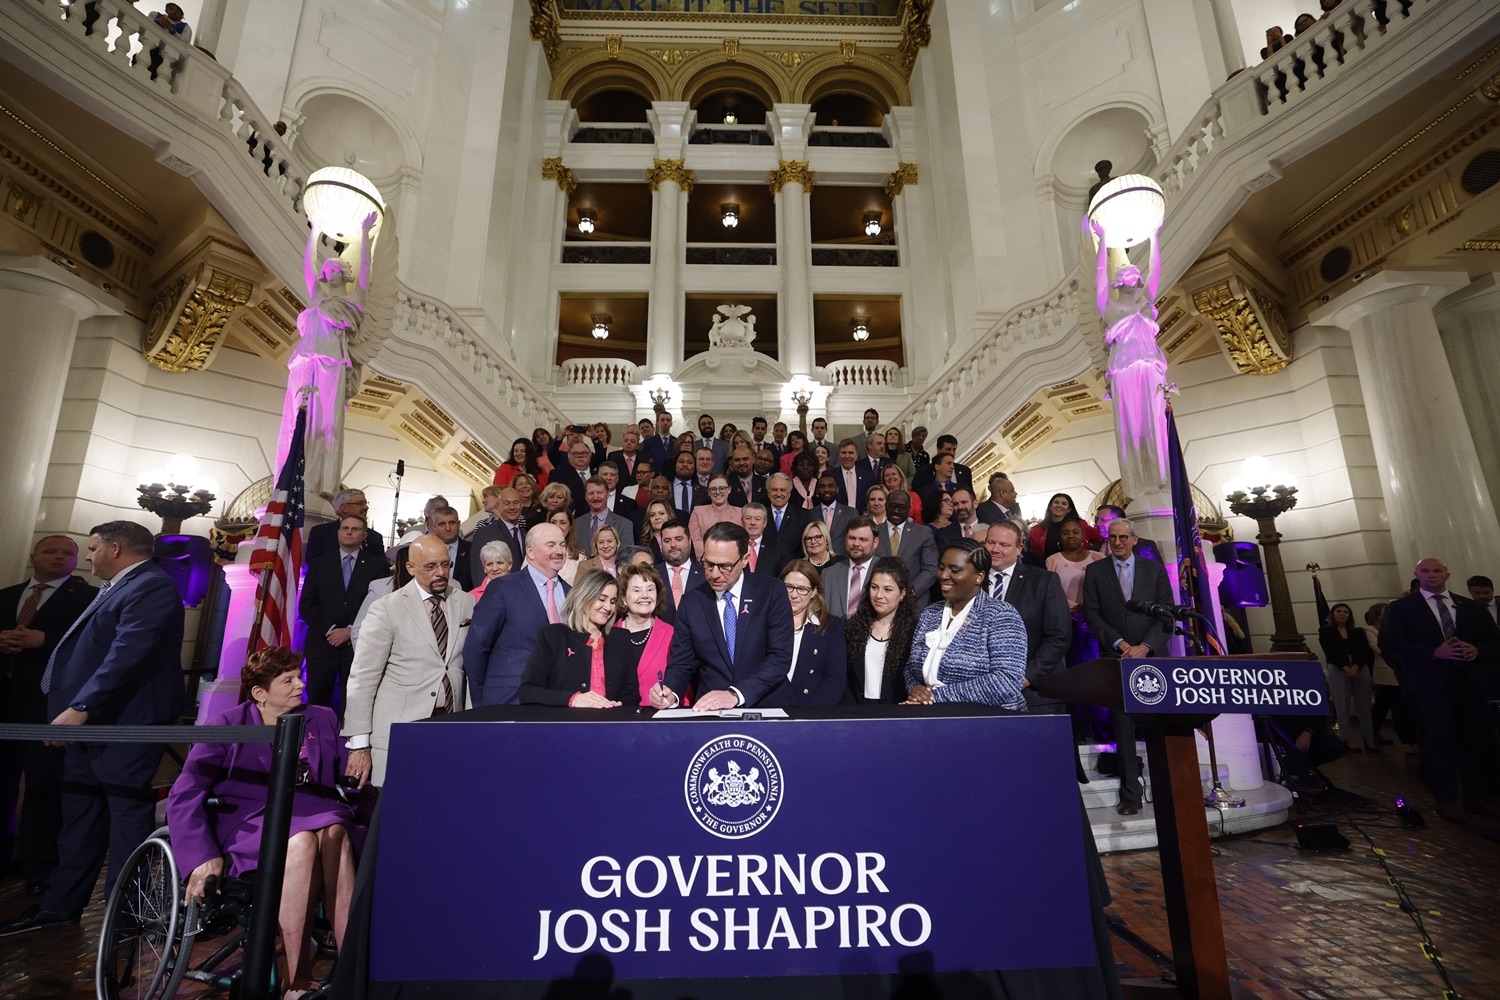 Governor Josh Shapiro signed the first bill of his Administration - Act 1 of 2023, a first-of-its-kind law in the nation that will require insurers to cover preventive breast and ovarian cancer screenings for high-risk women at no cost. MAY 01, 2023 - HARRISBURG, PA<br><a href="https://filesource.amperwave.net/commonwealthofpa/photo/23041_gov_sb8_dz_017.JPG" target="_blank">⇣ Download Photo</a>